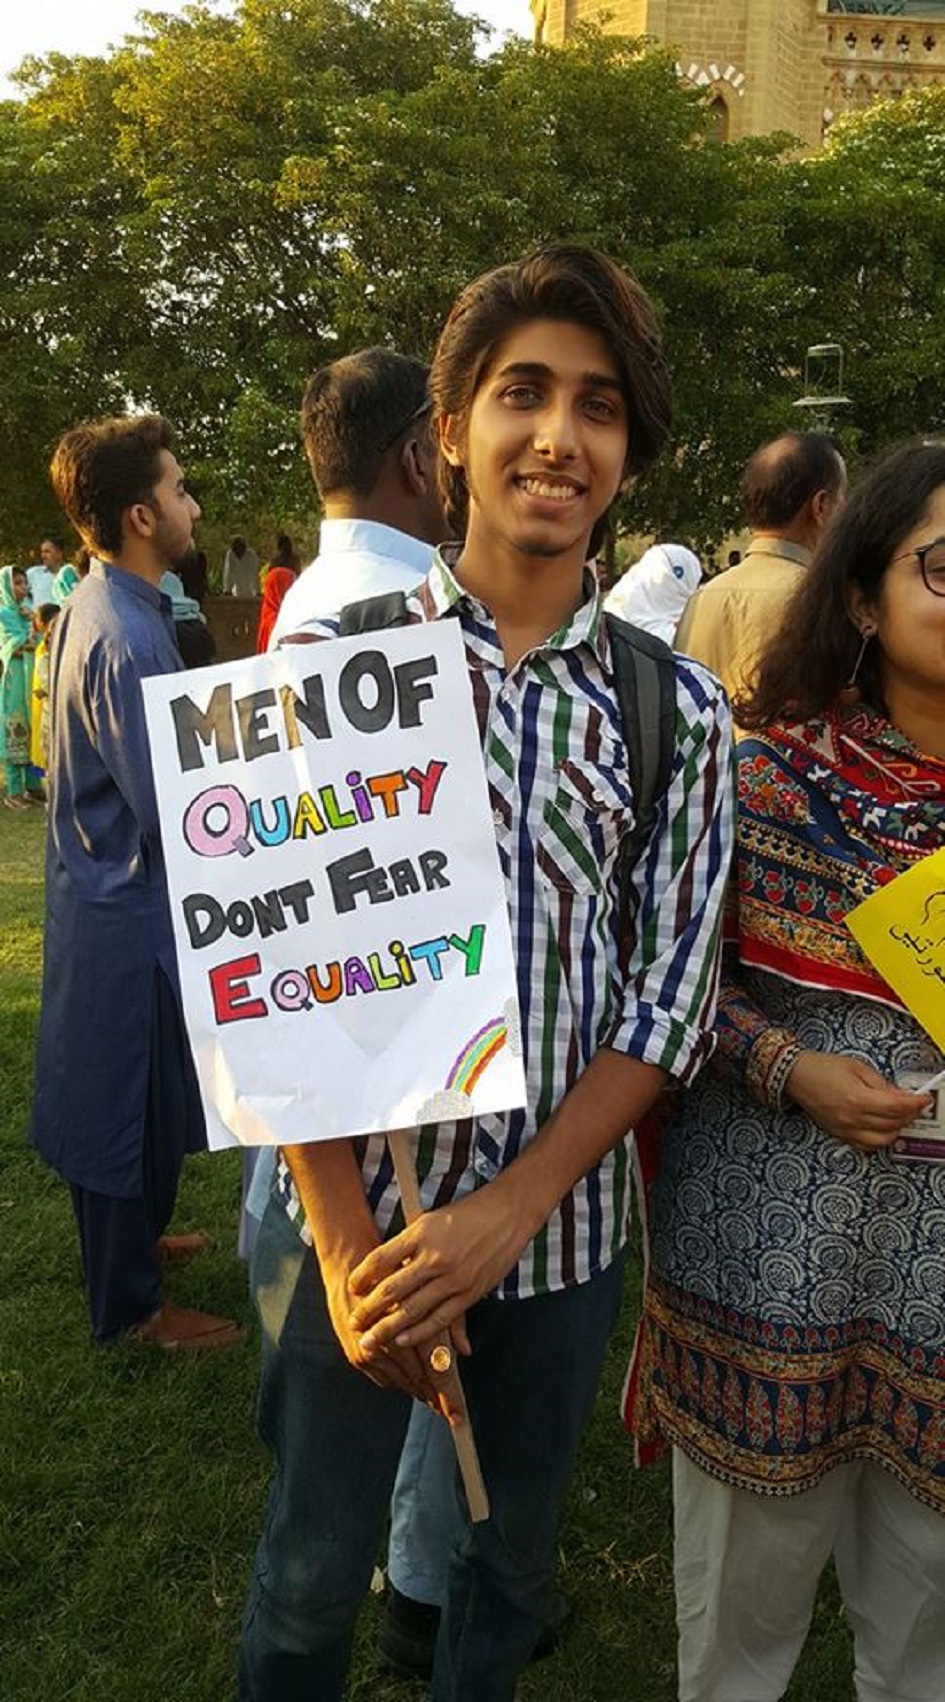 Male campaigner shows solidarity with a sign calling for more men to embrace of equality instead of fearing it - Photo Courtesy Hija Kamran